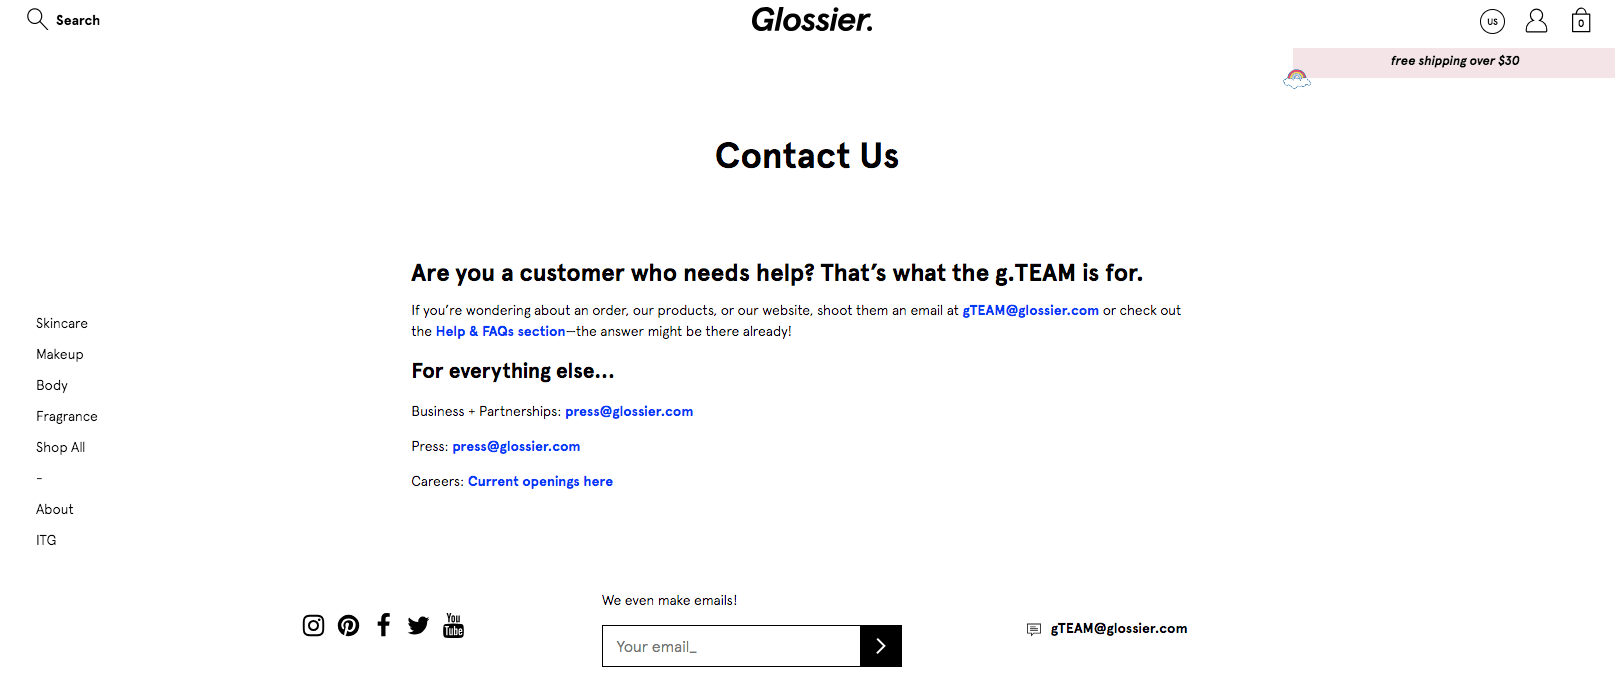 glossier-contact-us-page-update